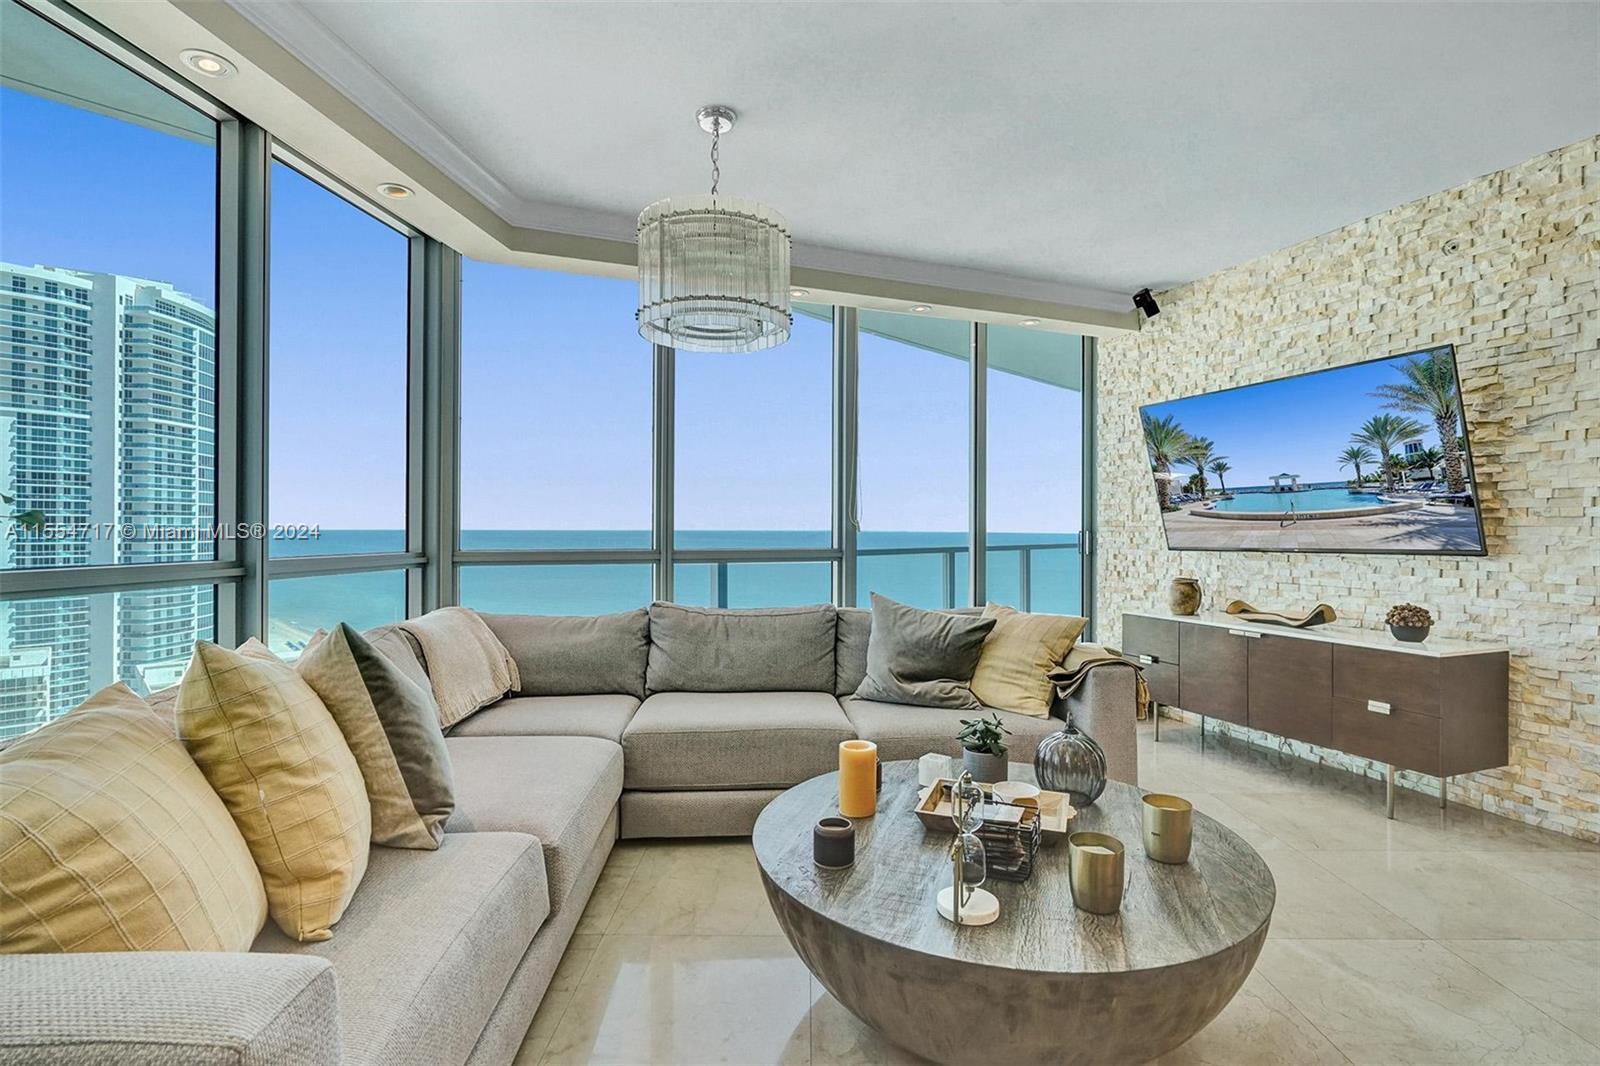 Photo of 3101 S Ocean Dr #2605 in Hollywood, FL